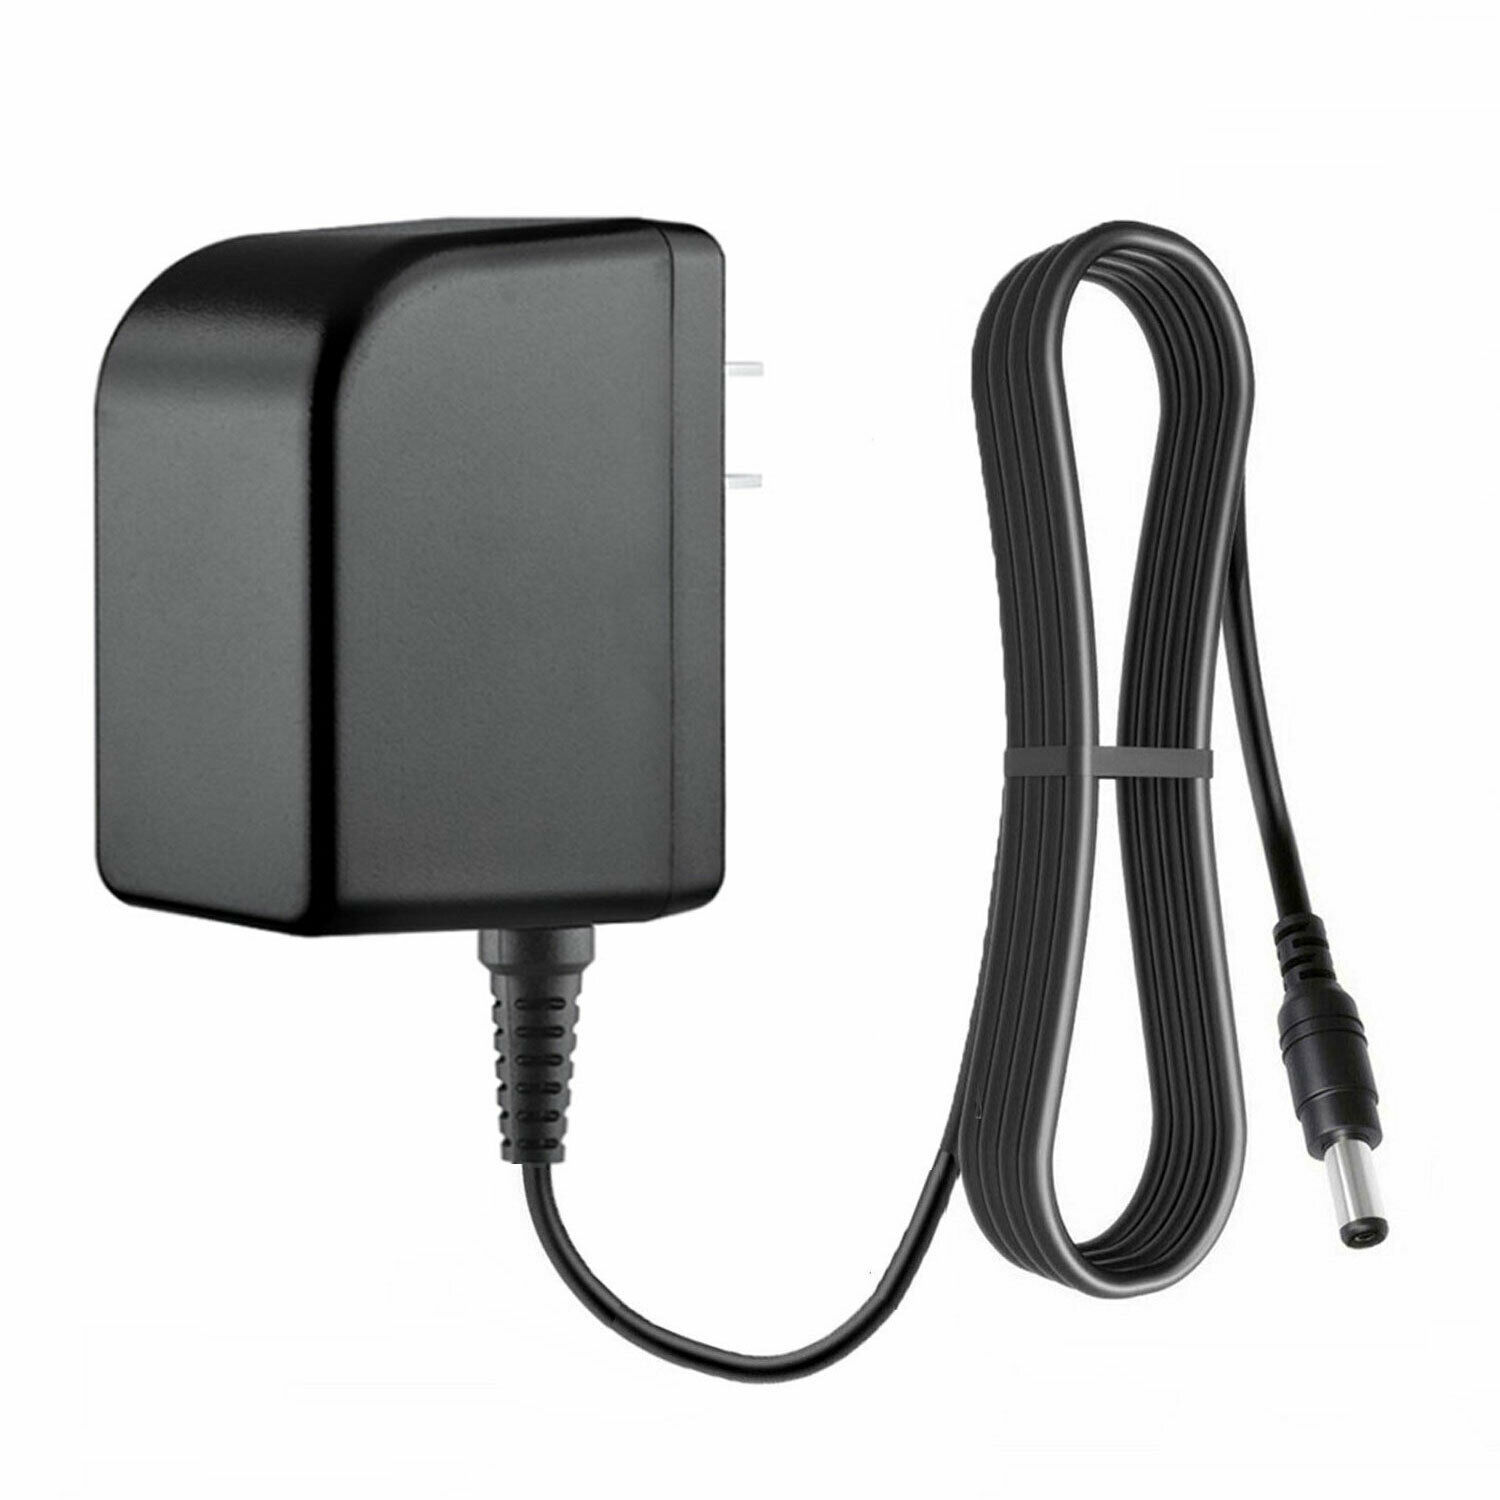 AC Power Adapter For Coming Data CP0540 5v 4a 20w charger 3.5mm/1.3mm PSU Type: AC to DC Power Coming Data Does n